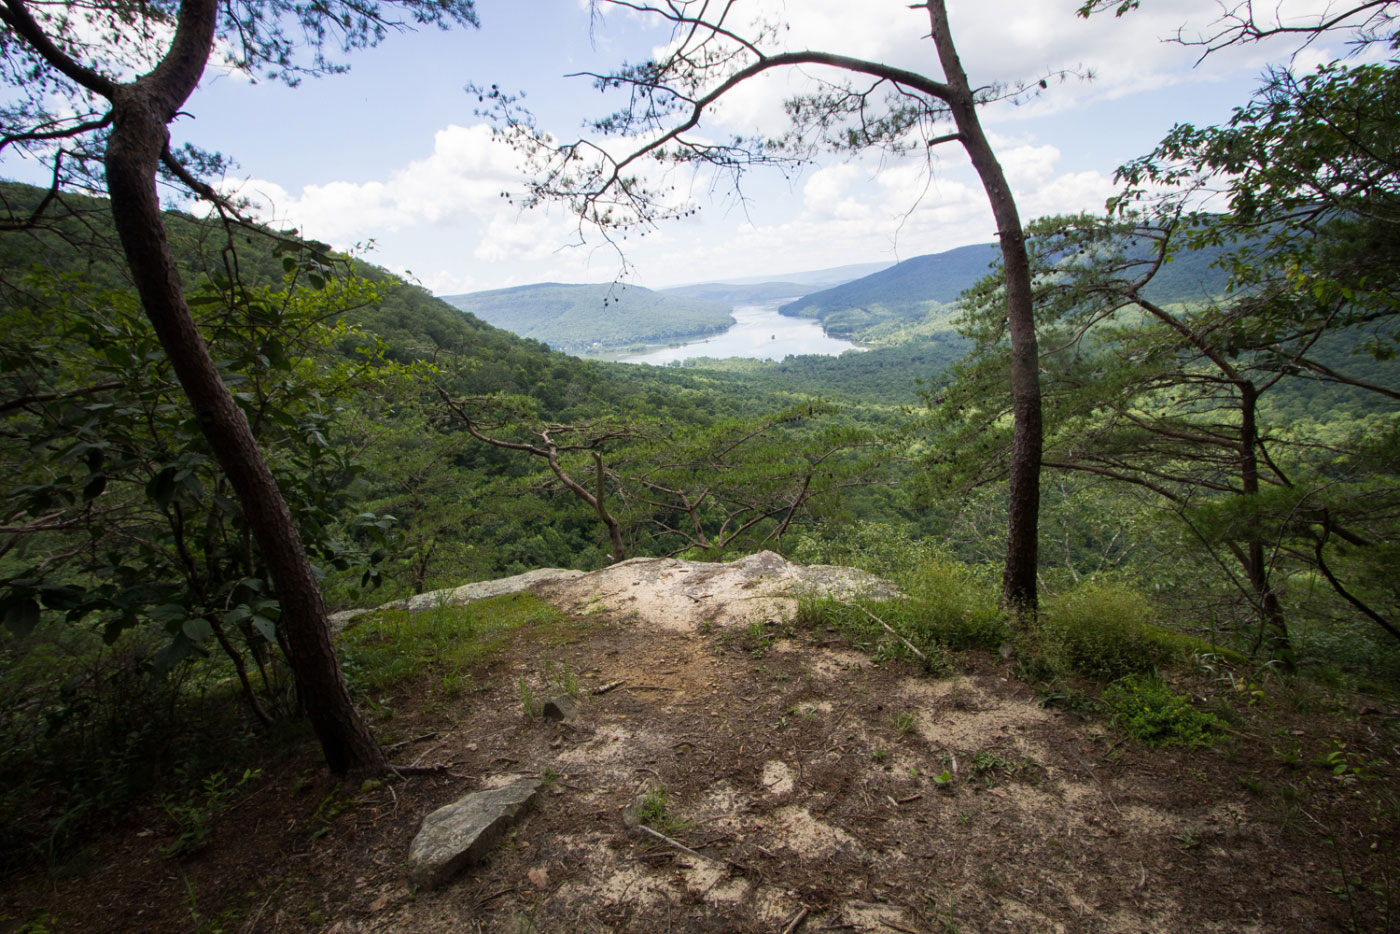 Hike Pot Point Loop in Prentice Cooper State Forest, Tennessee - Stav is Lost